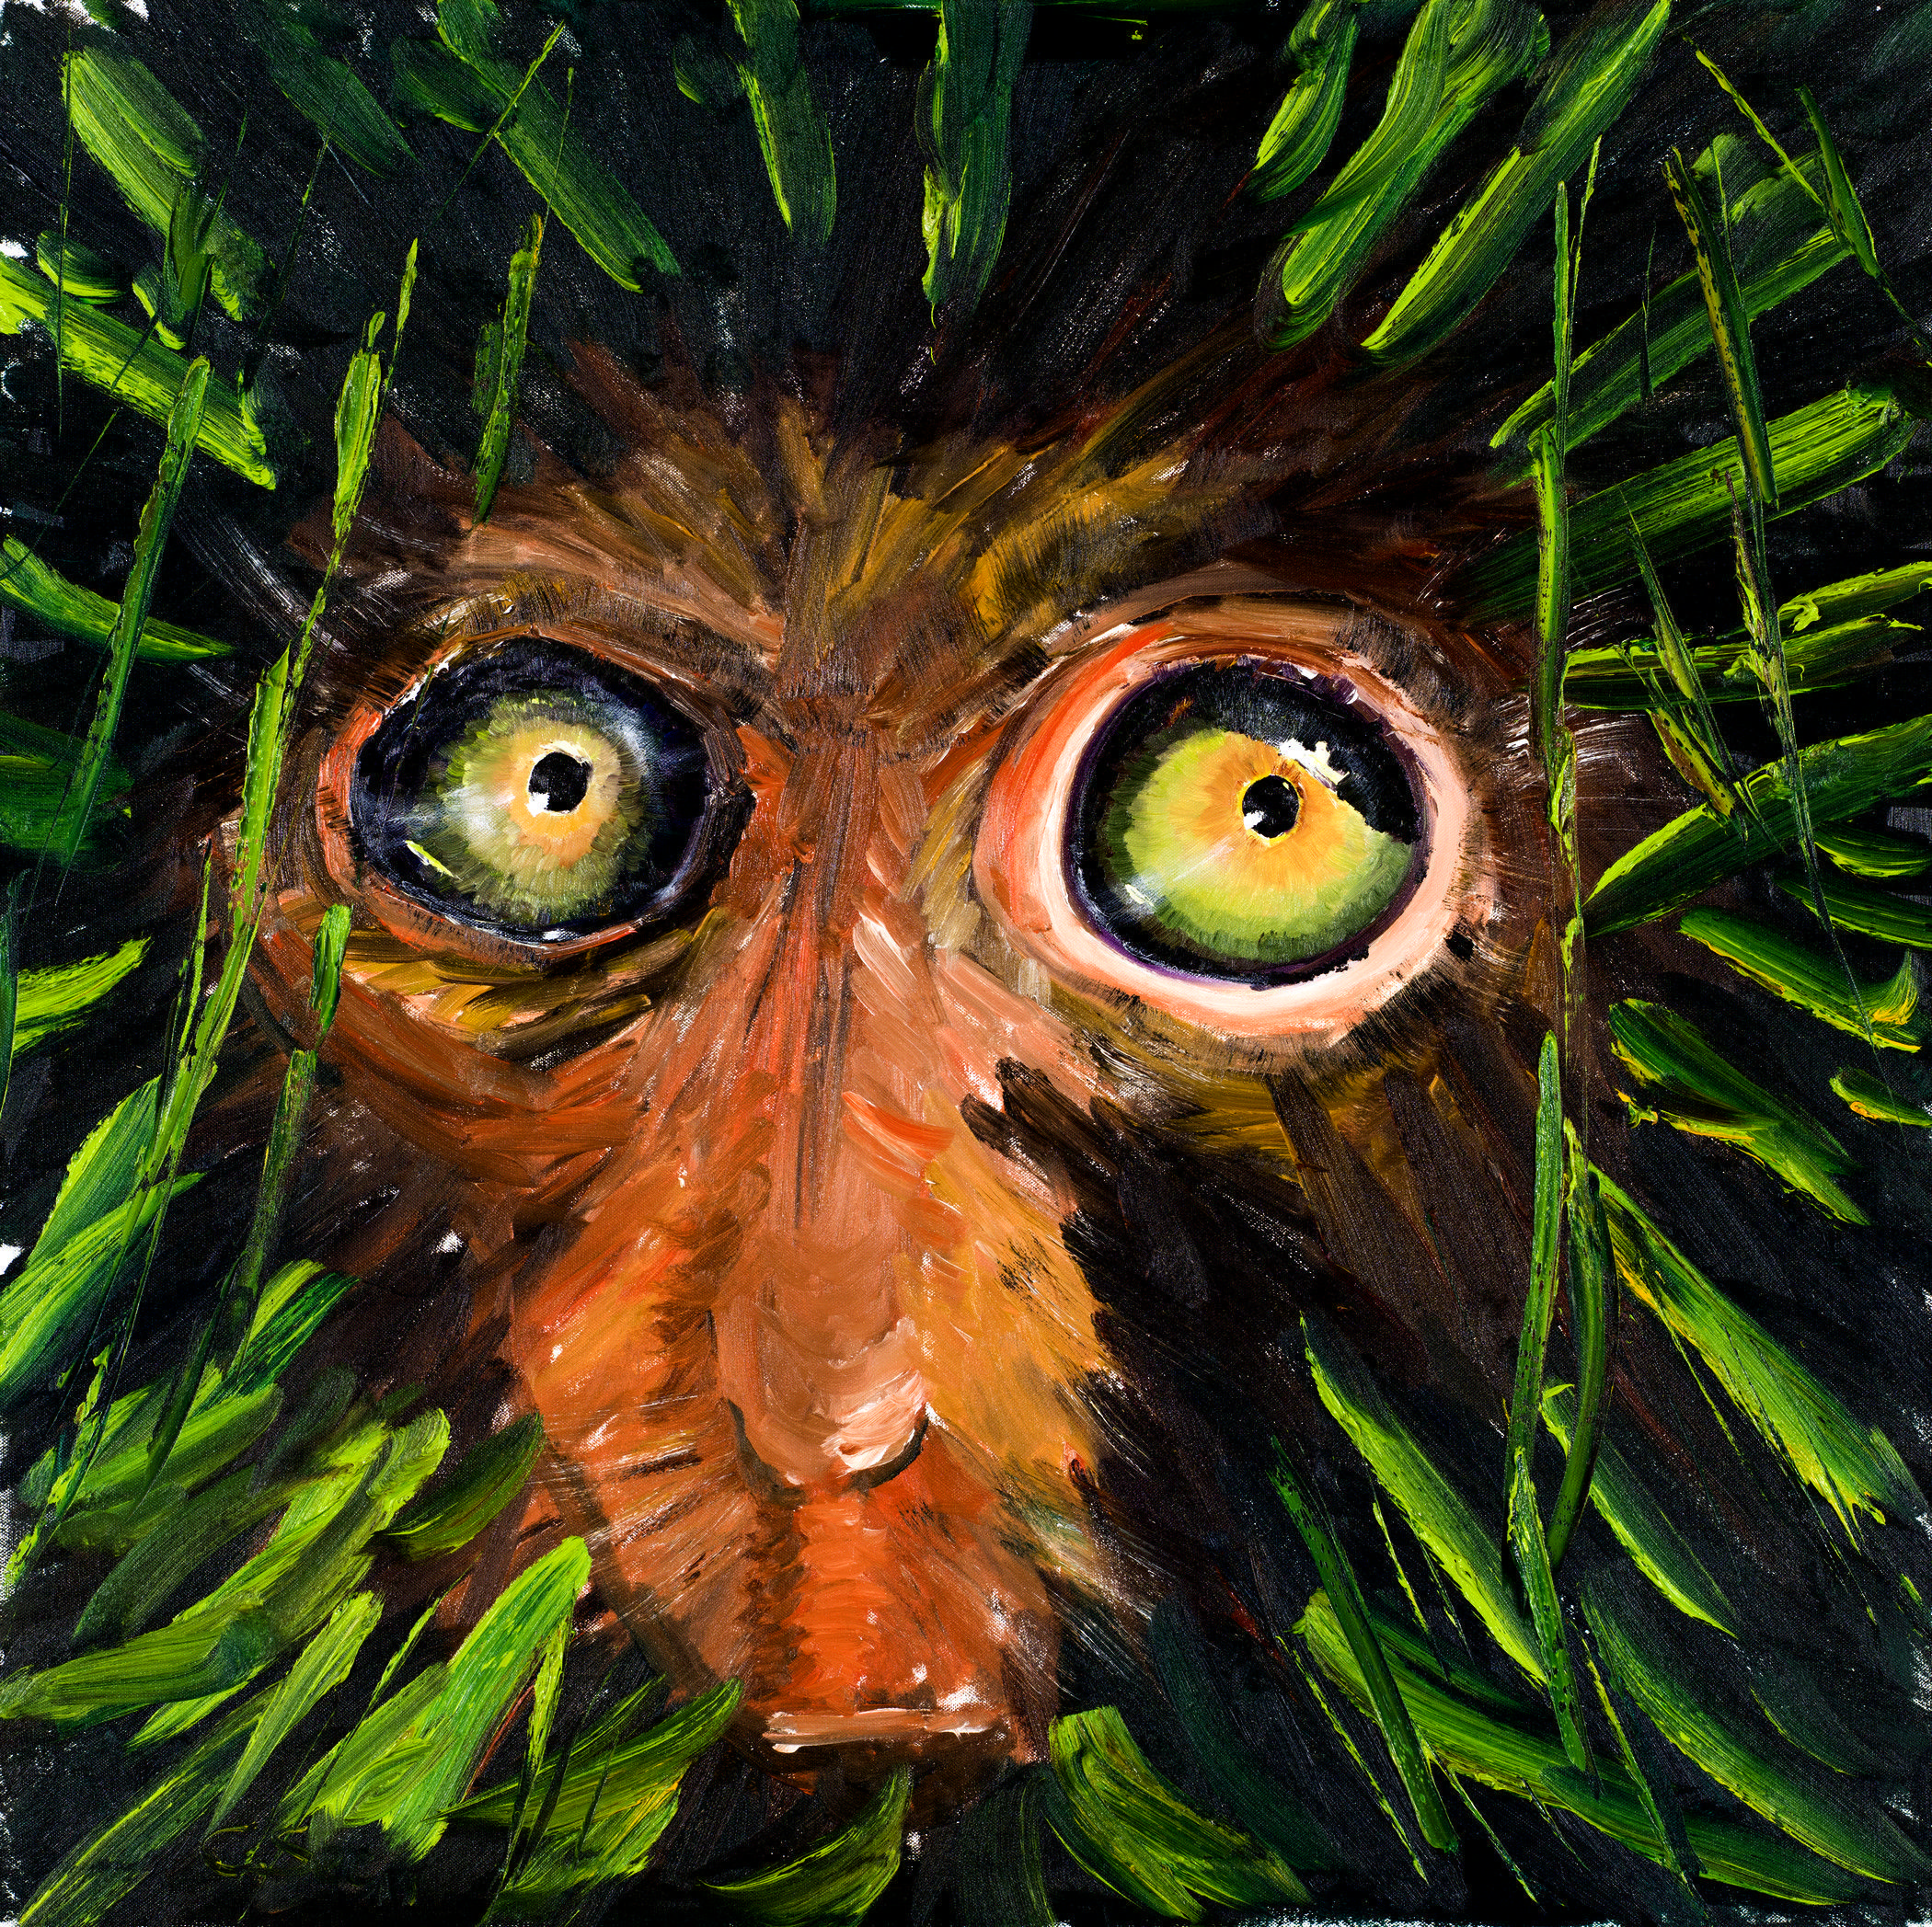 Monkey in the rainforest is watching us. Oil painting in green by Christian Seebauer